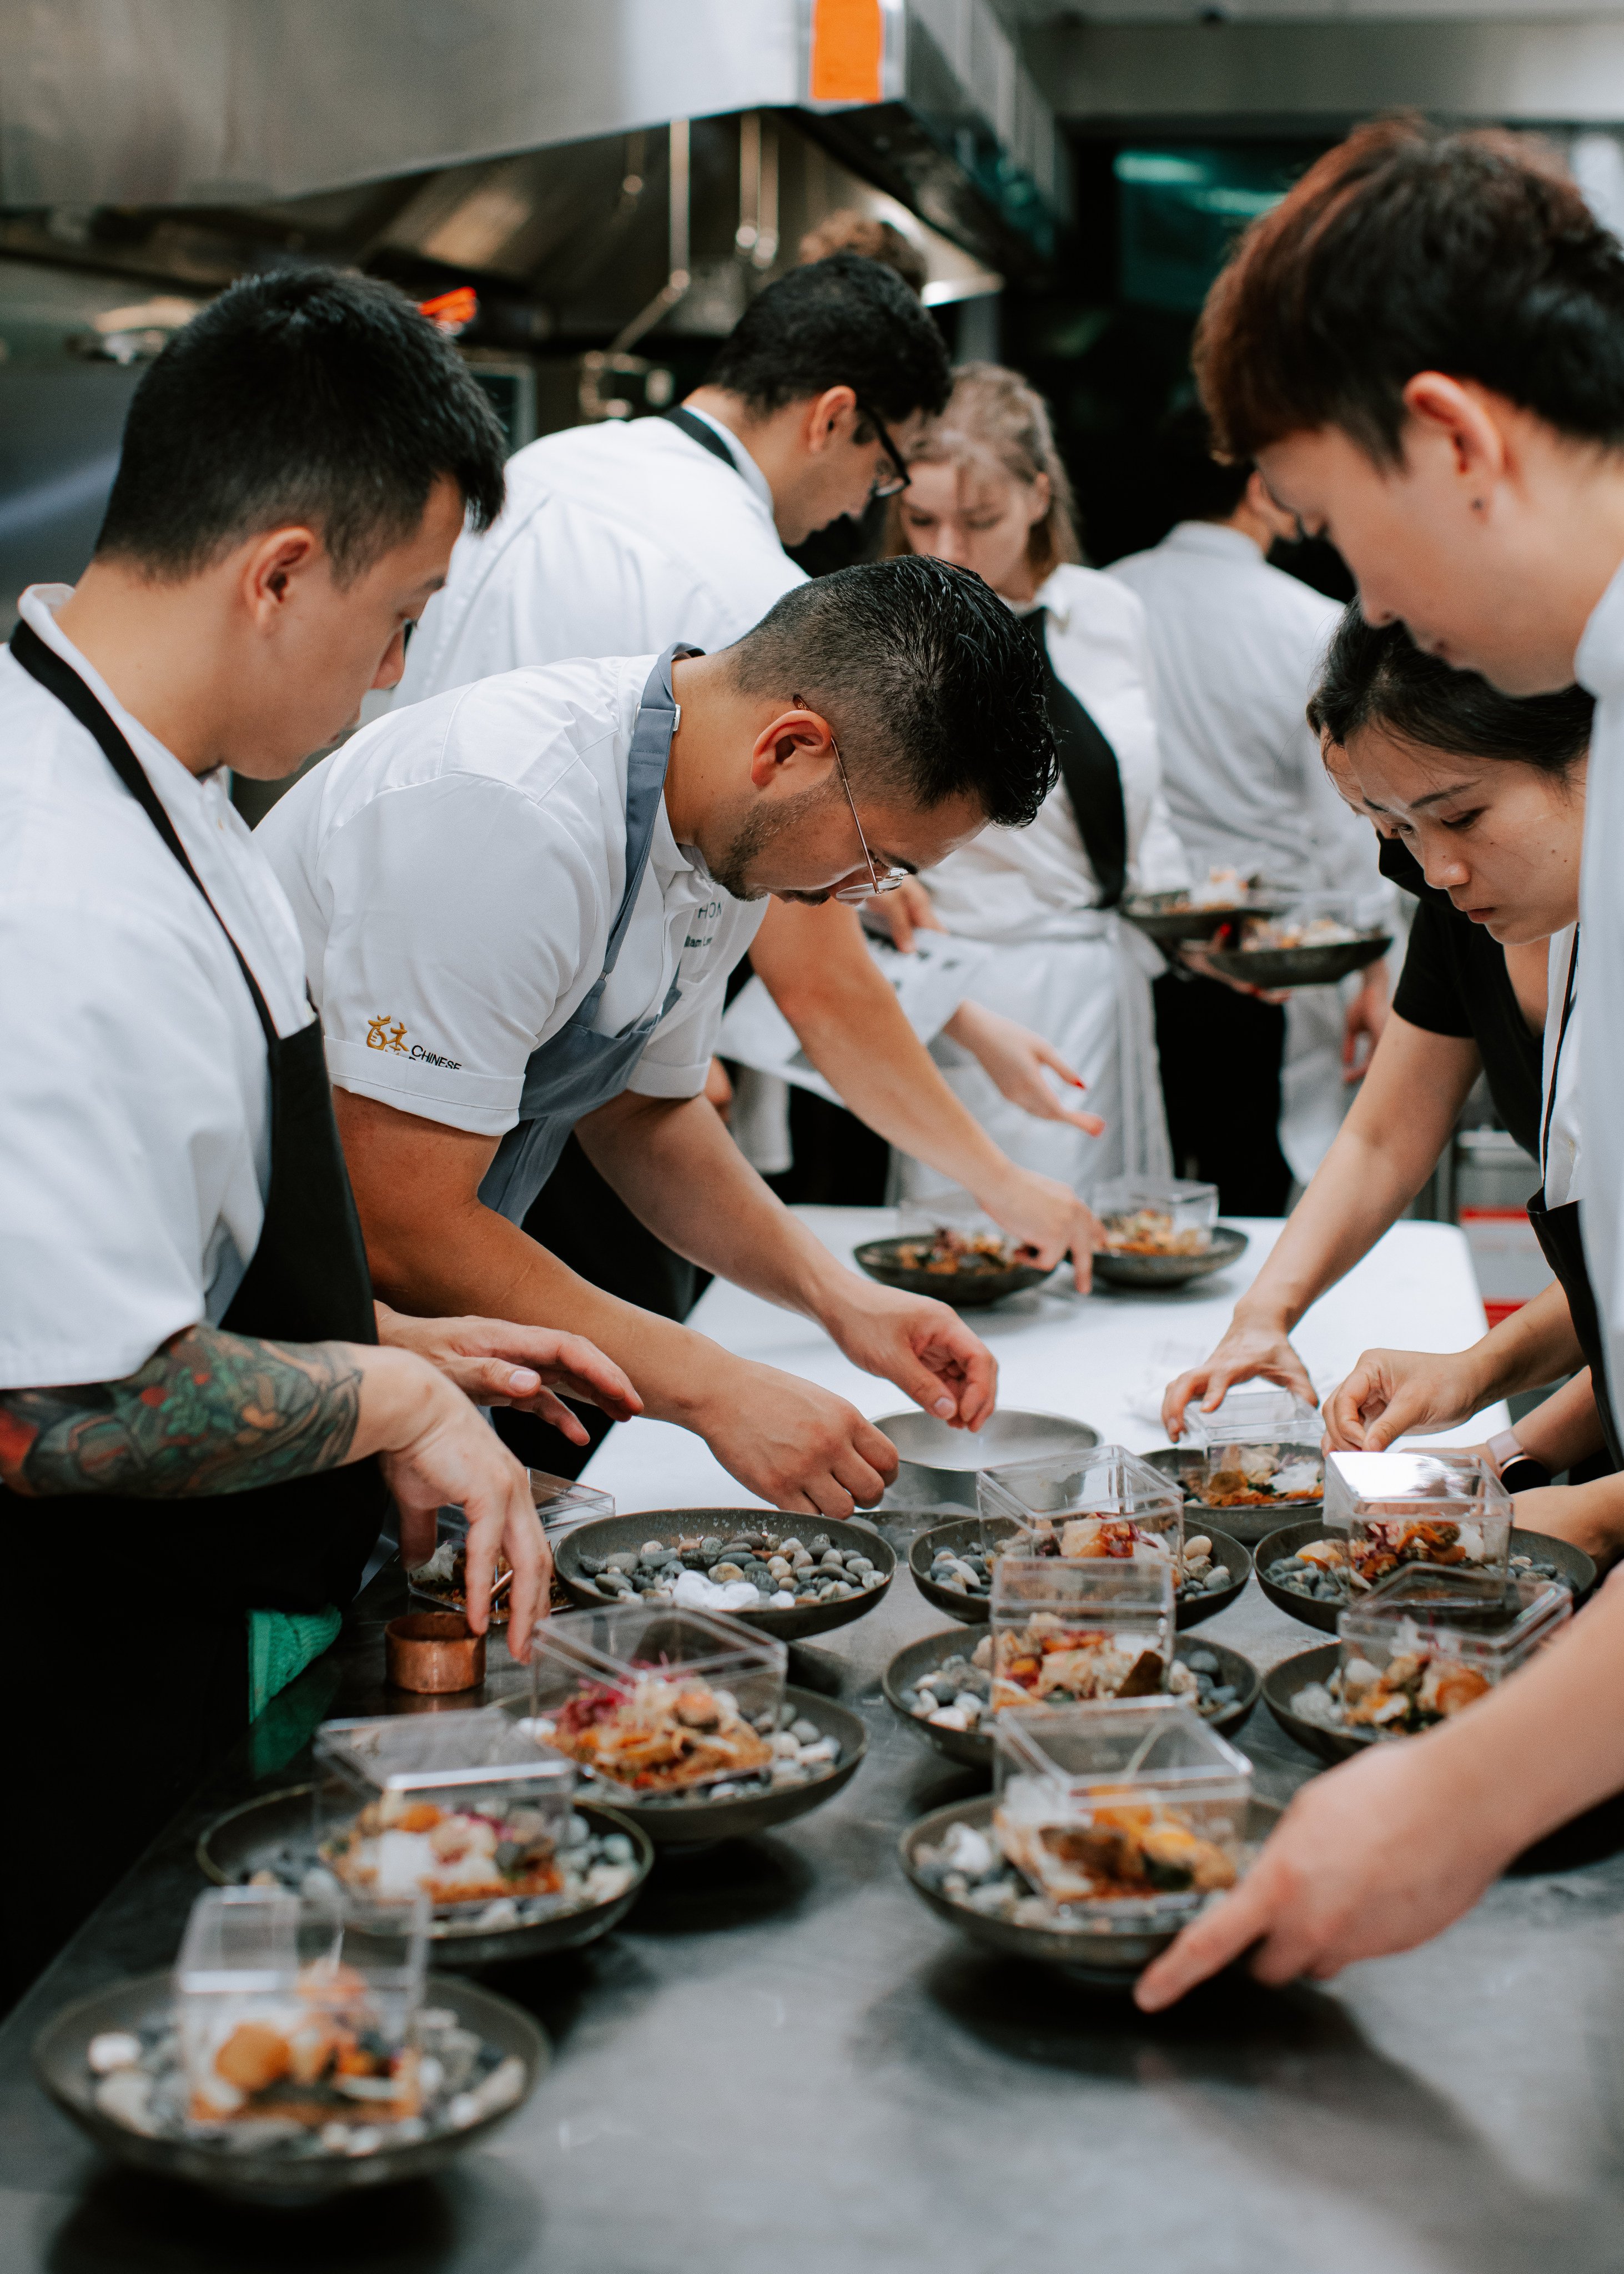 Vancouver-based chef William Lew (second from left) prepares a course for the Chinese Restaurant Awards’ dining series “Hong Kong Renaissance”. Photo: Chinese Restaurant Awards